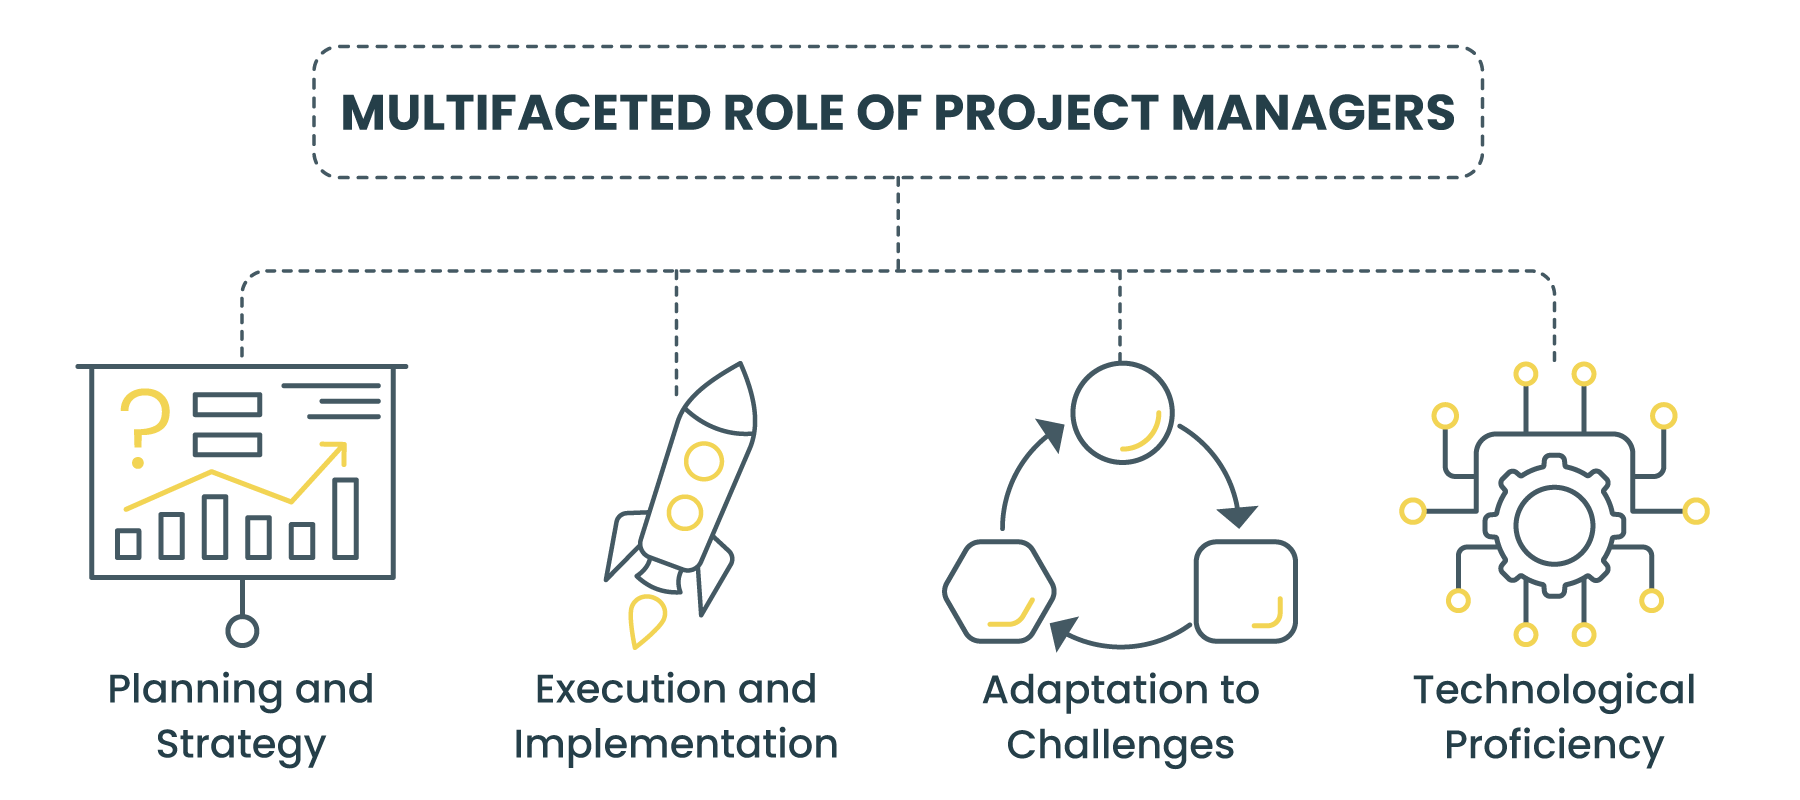 A Multifaceted Role of project managers